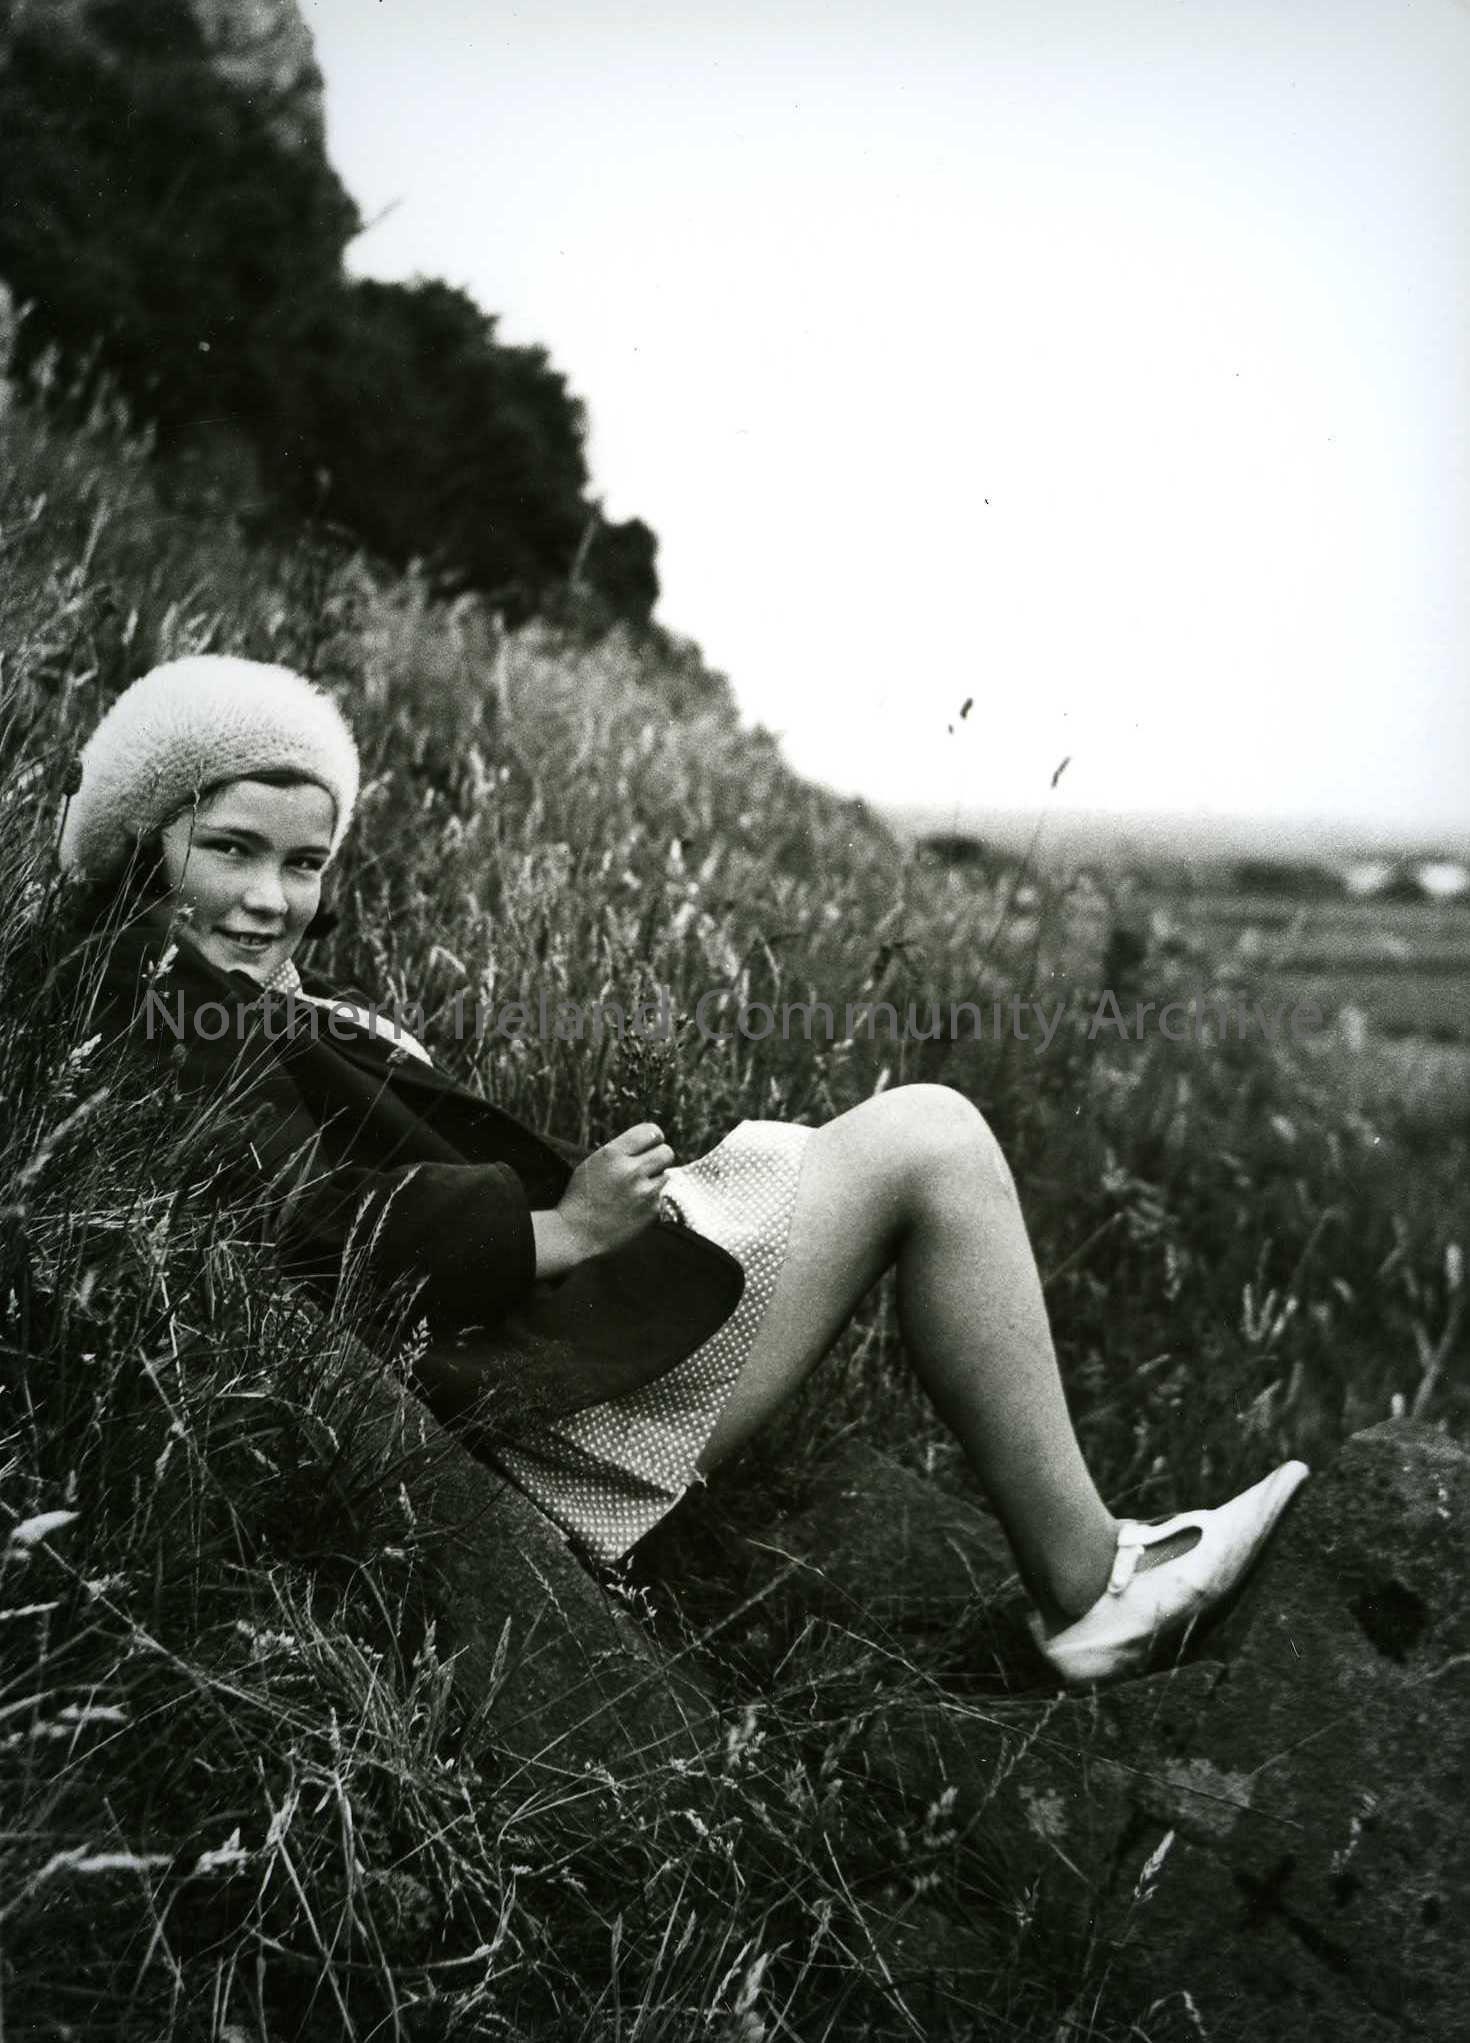 Printed black and white photograph – Olive Craig (nee Henry) sitting on a grassy hill.